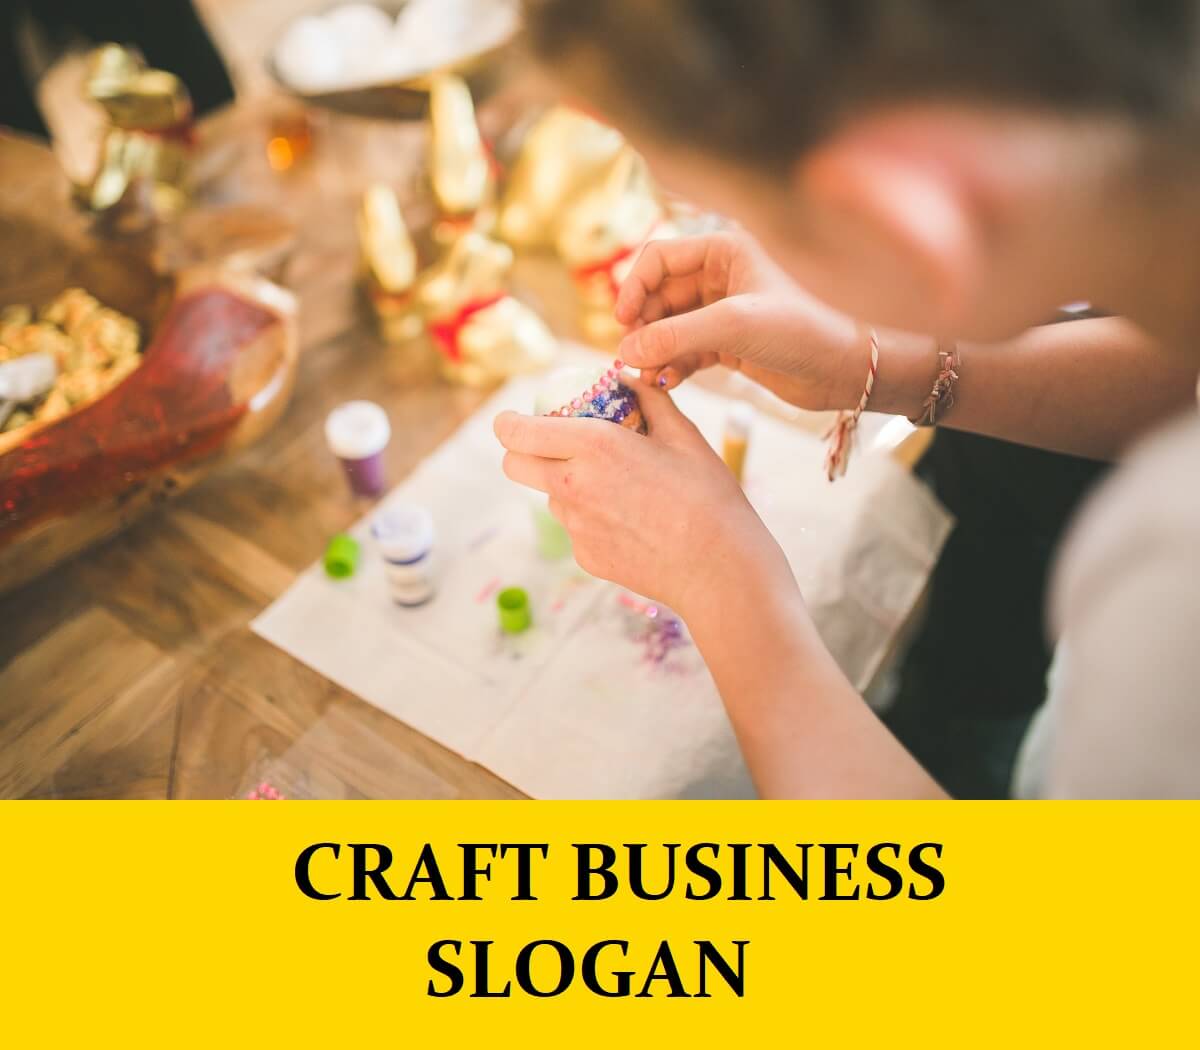 Slogan for Craft Business